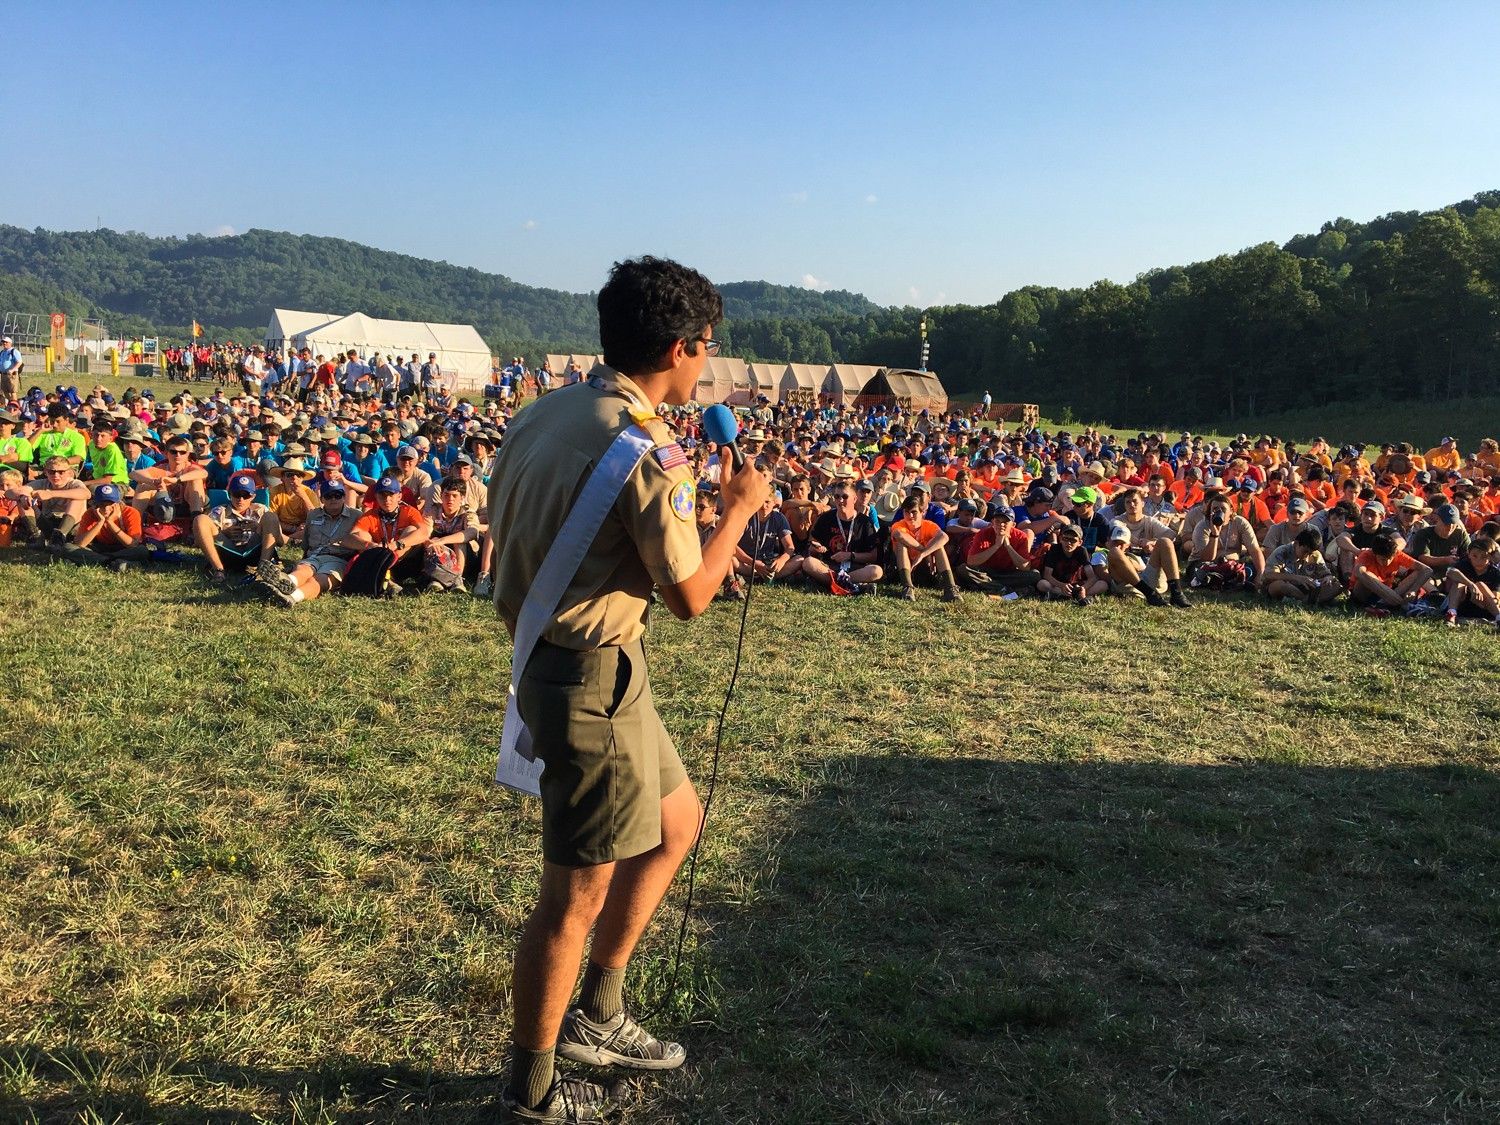 Manny Lopez, an Eagle Scout from California, talks to more than a thousand fellow scouts at Base Camp Delta about the Out of Eden Walk and the opportunity to join Paul Salopek on the trail. Image by Mark Schulte. United States, 2017.